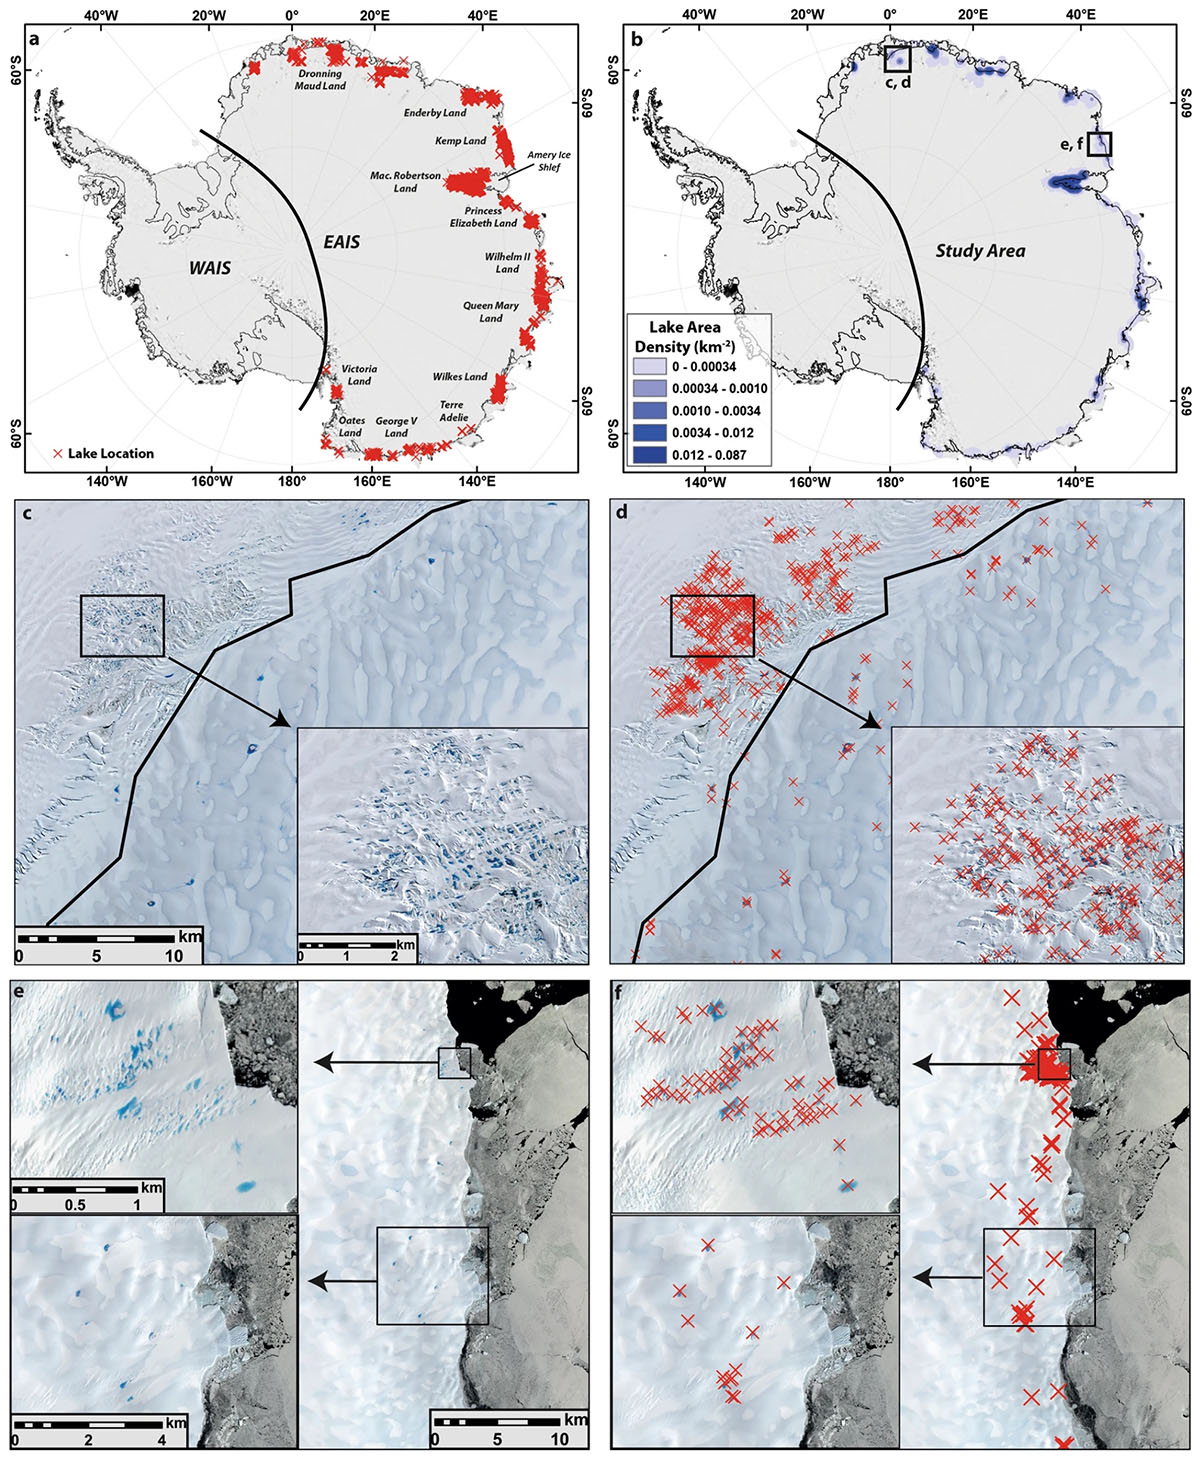 Fig. 5:  "Location and density of supraglacial lakes (SGLs) in East Antarctica, alongside examples. (a) Location of 65,459 mapped lakes that appeared on imagery from January 2017, each marked by a red cross. (b) Lake density map showing the cumulative area of SGLs within 1 km2 cells using a 50 km search radius. (c,d) Sentinel 2A satellite image (12th Jan 2017) of the high density of lakes on the Jutulstraumen Glacier, Dronning Maud Land. Note that lakes have developed above and beyond the grounding line (thick black line), but there is a clustering of lakes 5–10 km down-ice from the grounding line. (e,f) Sentinel 2A satellite image (27th Jan 2017) of clusters of lakes towards the ice sheet margin in Kemp Land." (Stokes et al., click on the image to  see the full report).